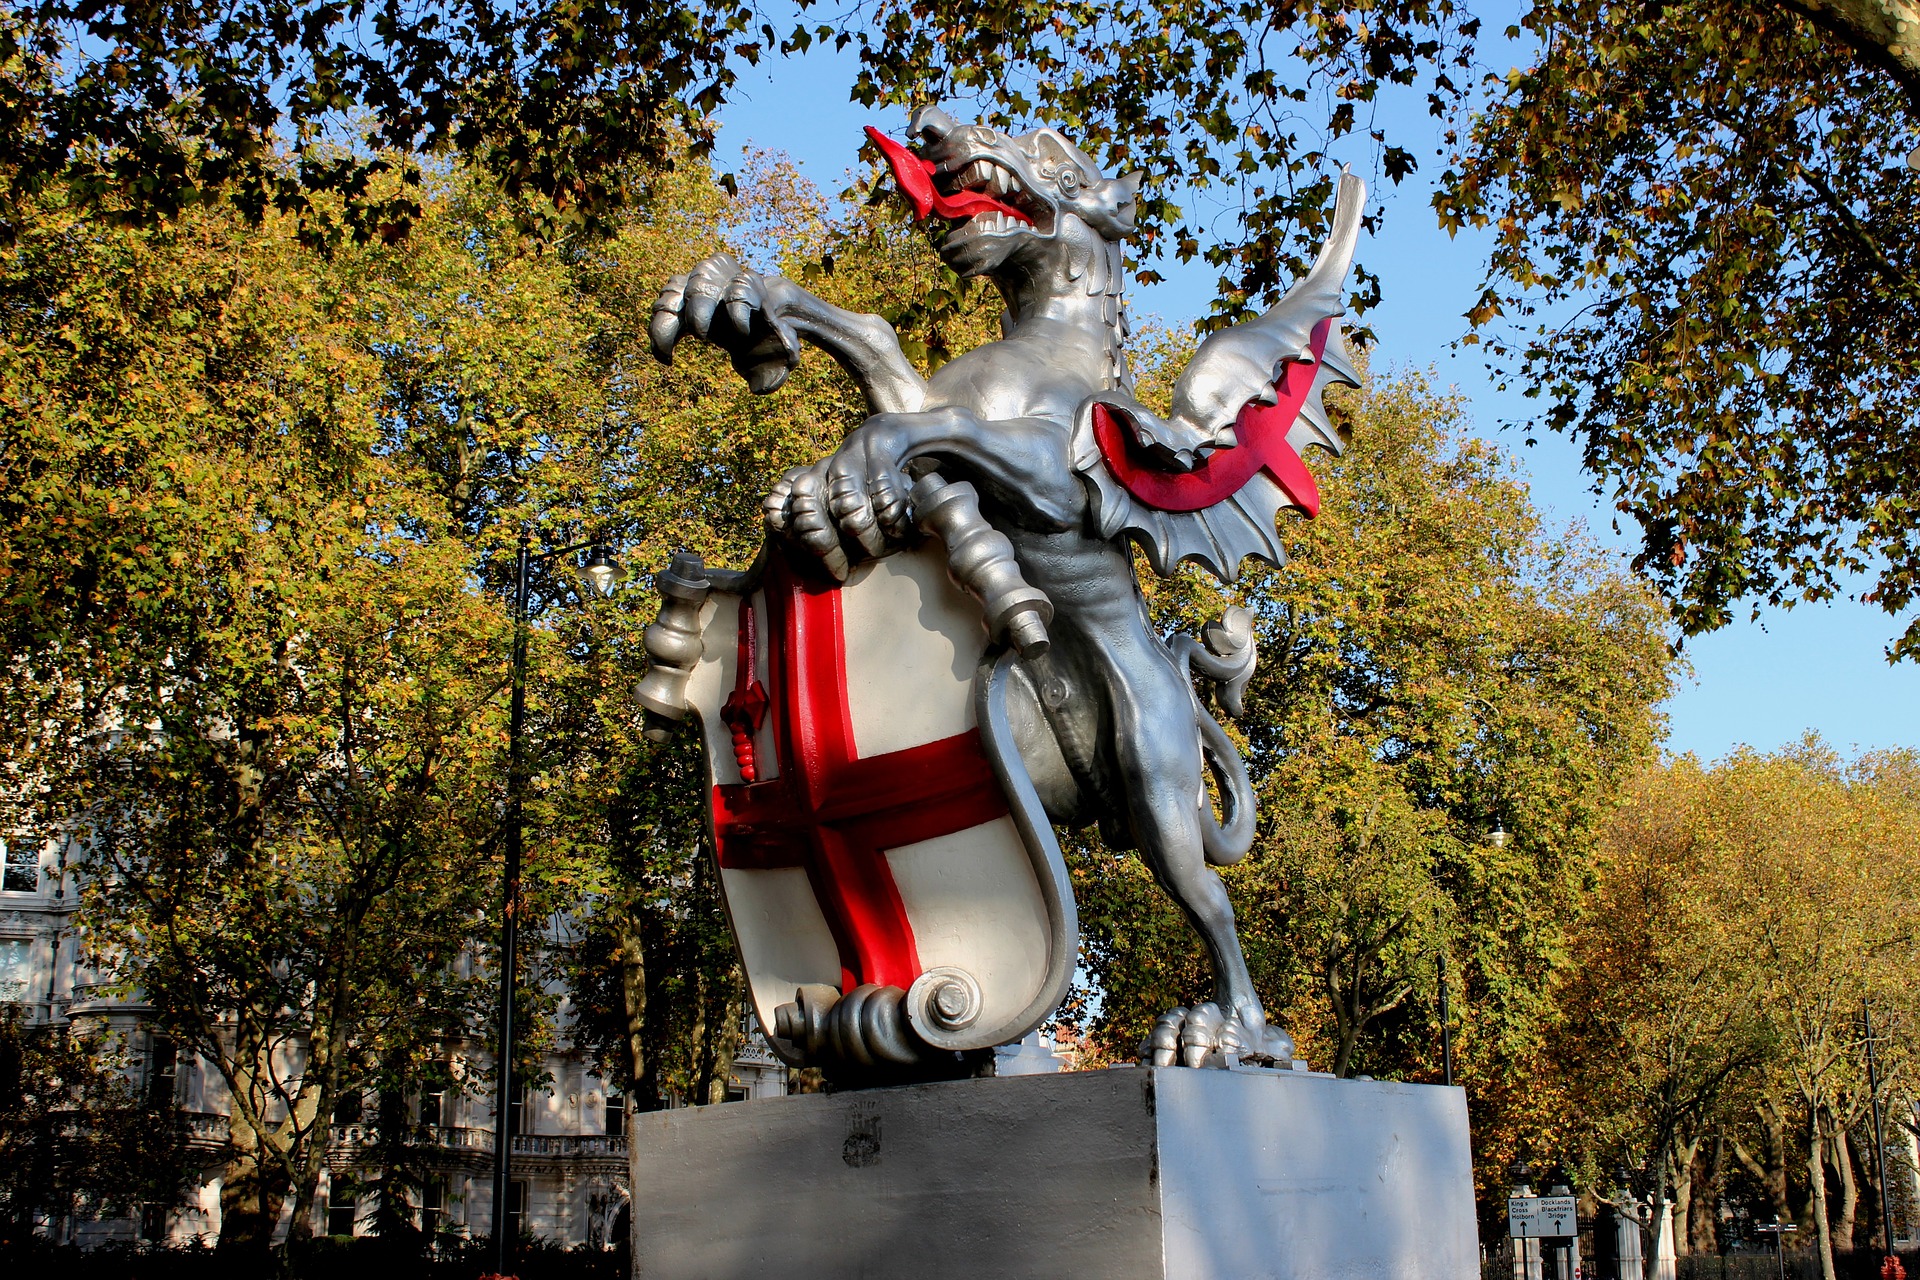 A statue of a dragon bearing the coat of arms of Saint George